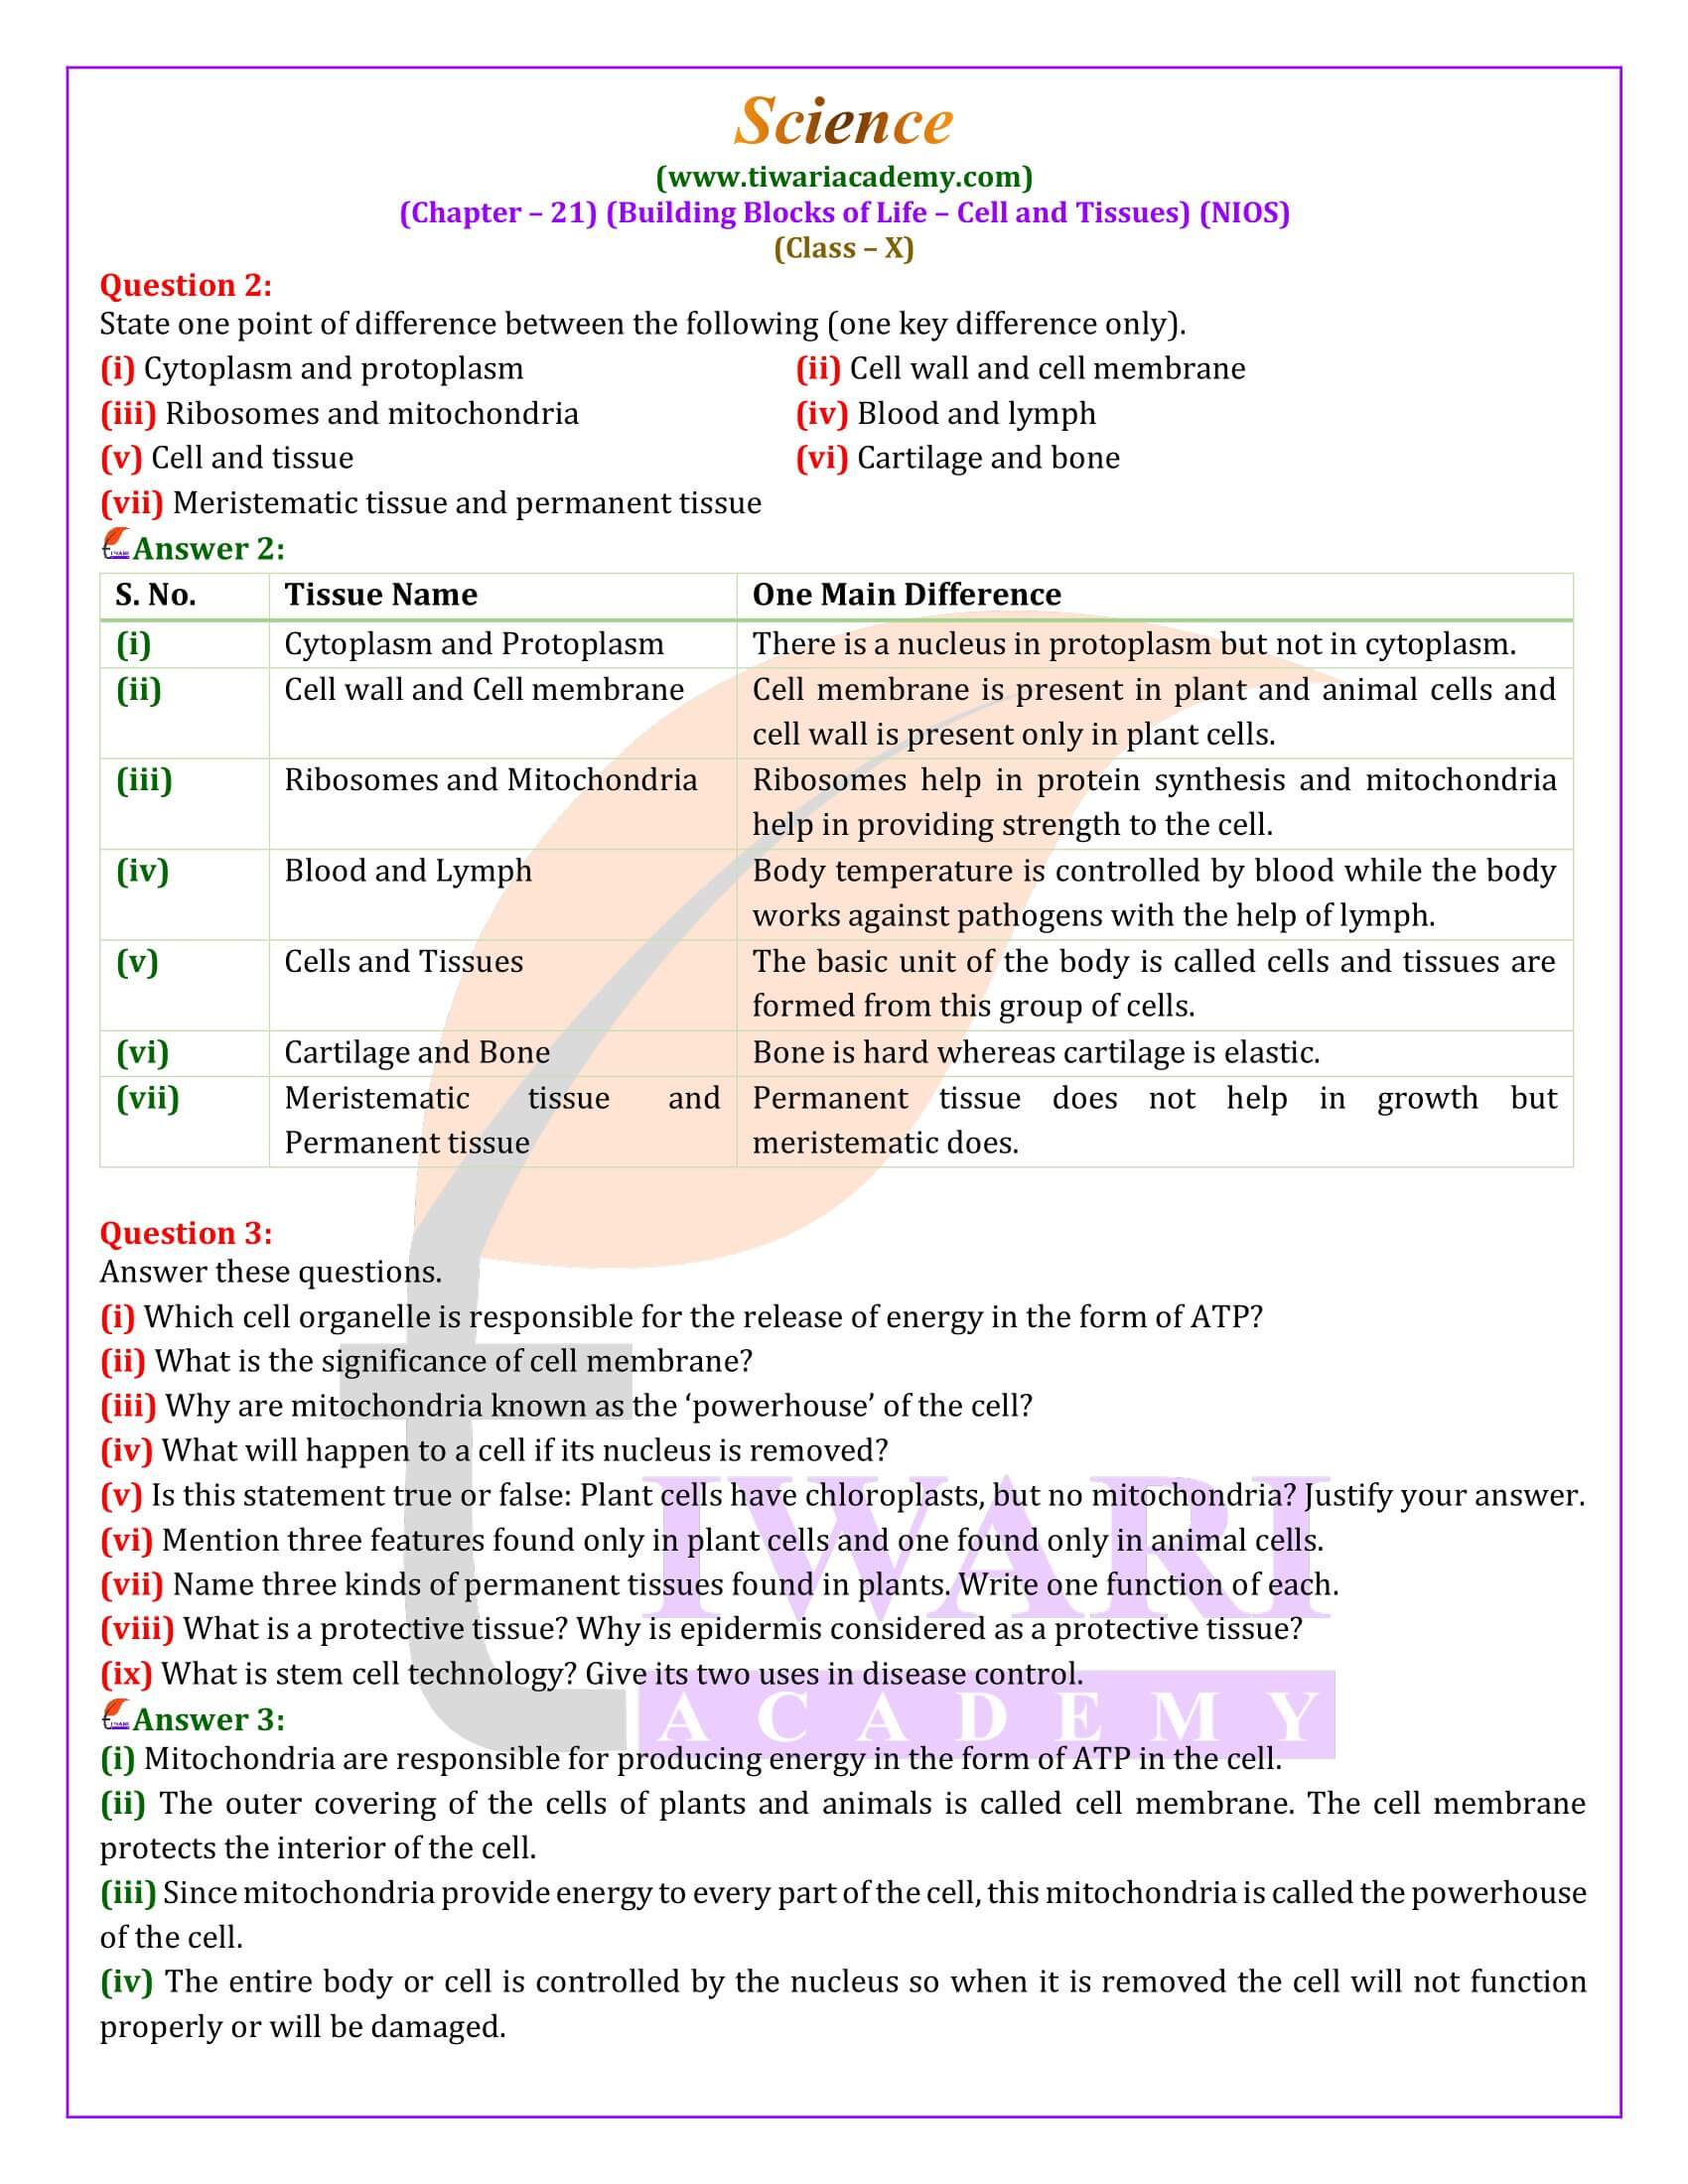 NIOS Class 10 Science Chapter 21 Question Answers